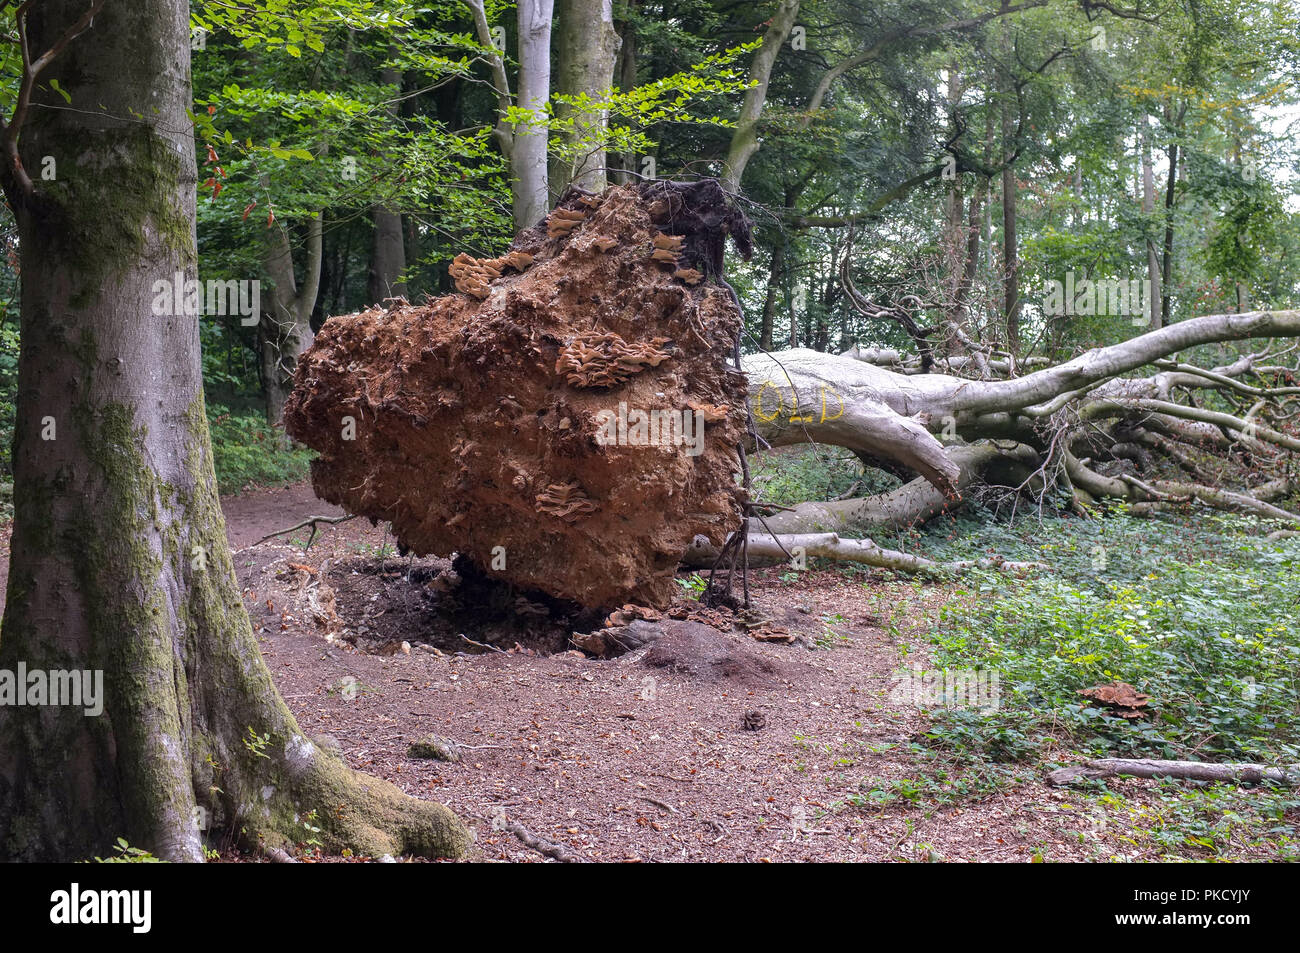 Storm victim -Fallen tree with root clump exposed. Grovely Woods Wiltshire. 2018 Stock Photo